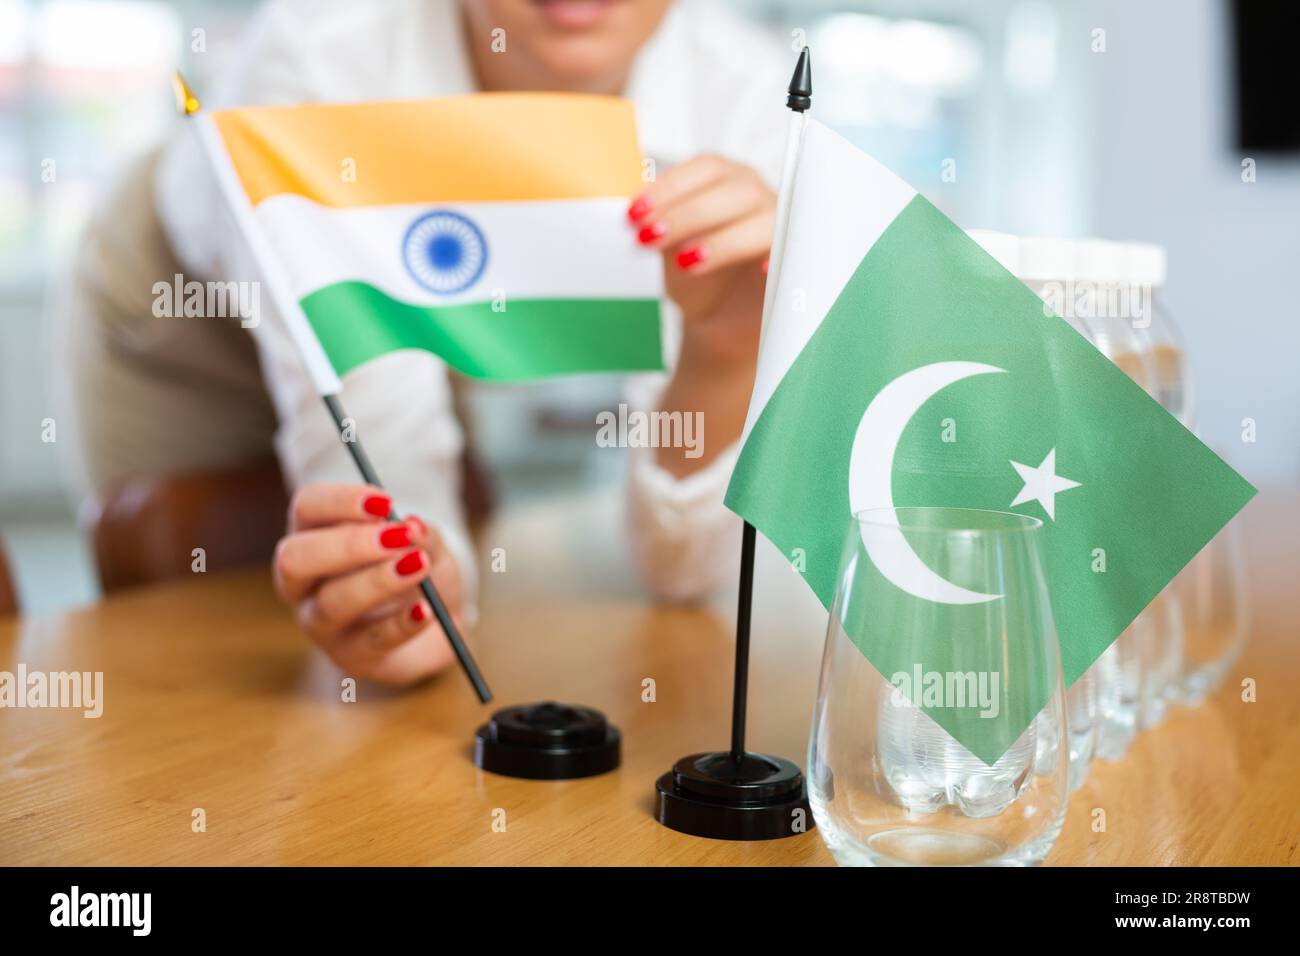 Young woman putting flags of India and Pakistan on table in office Stock Photo